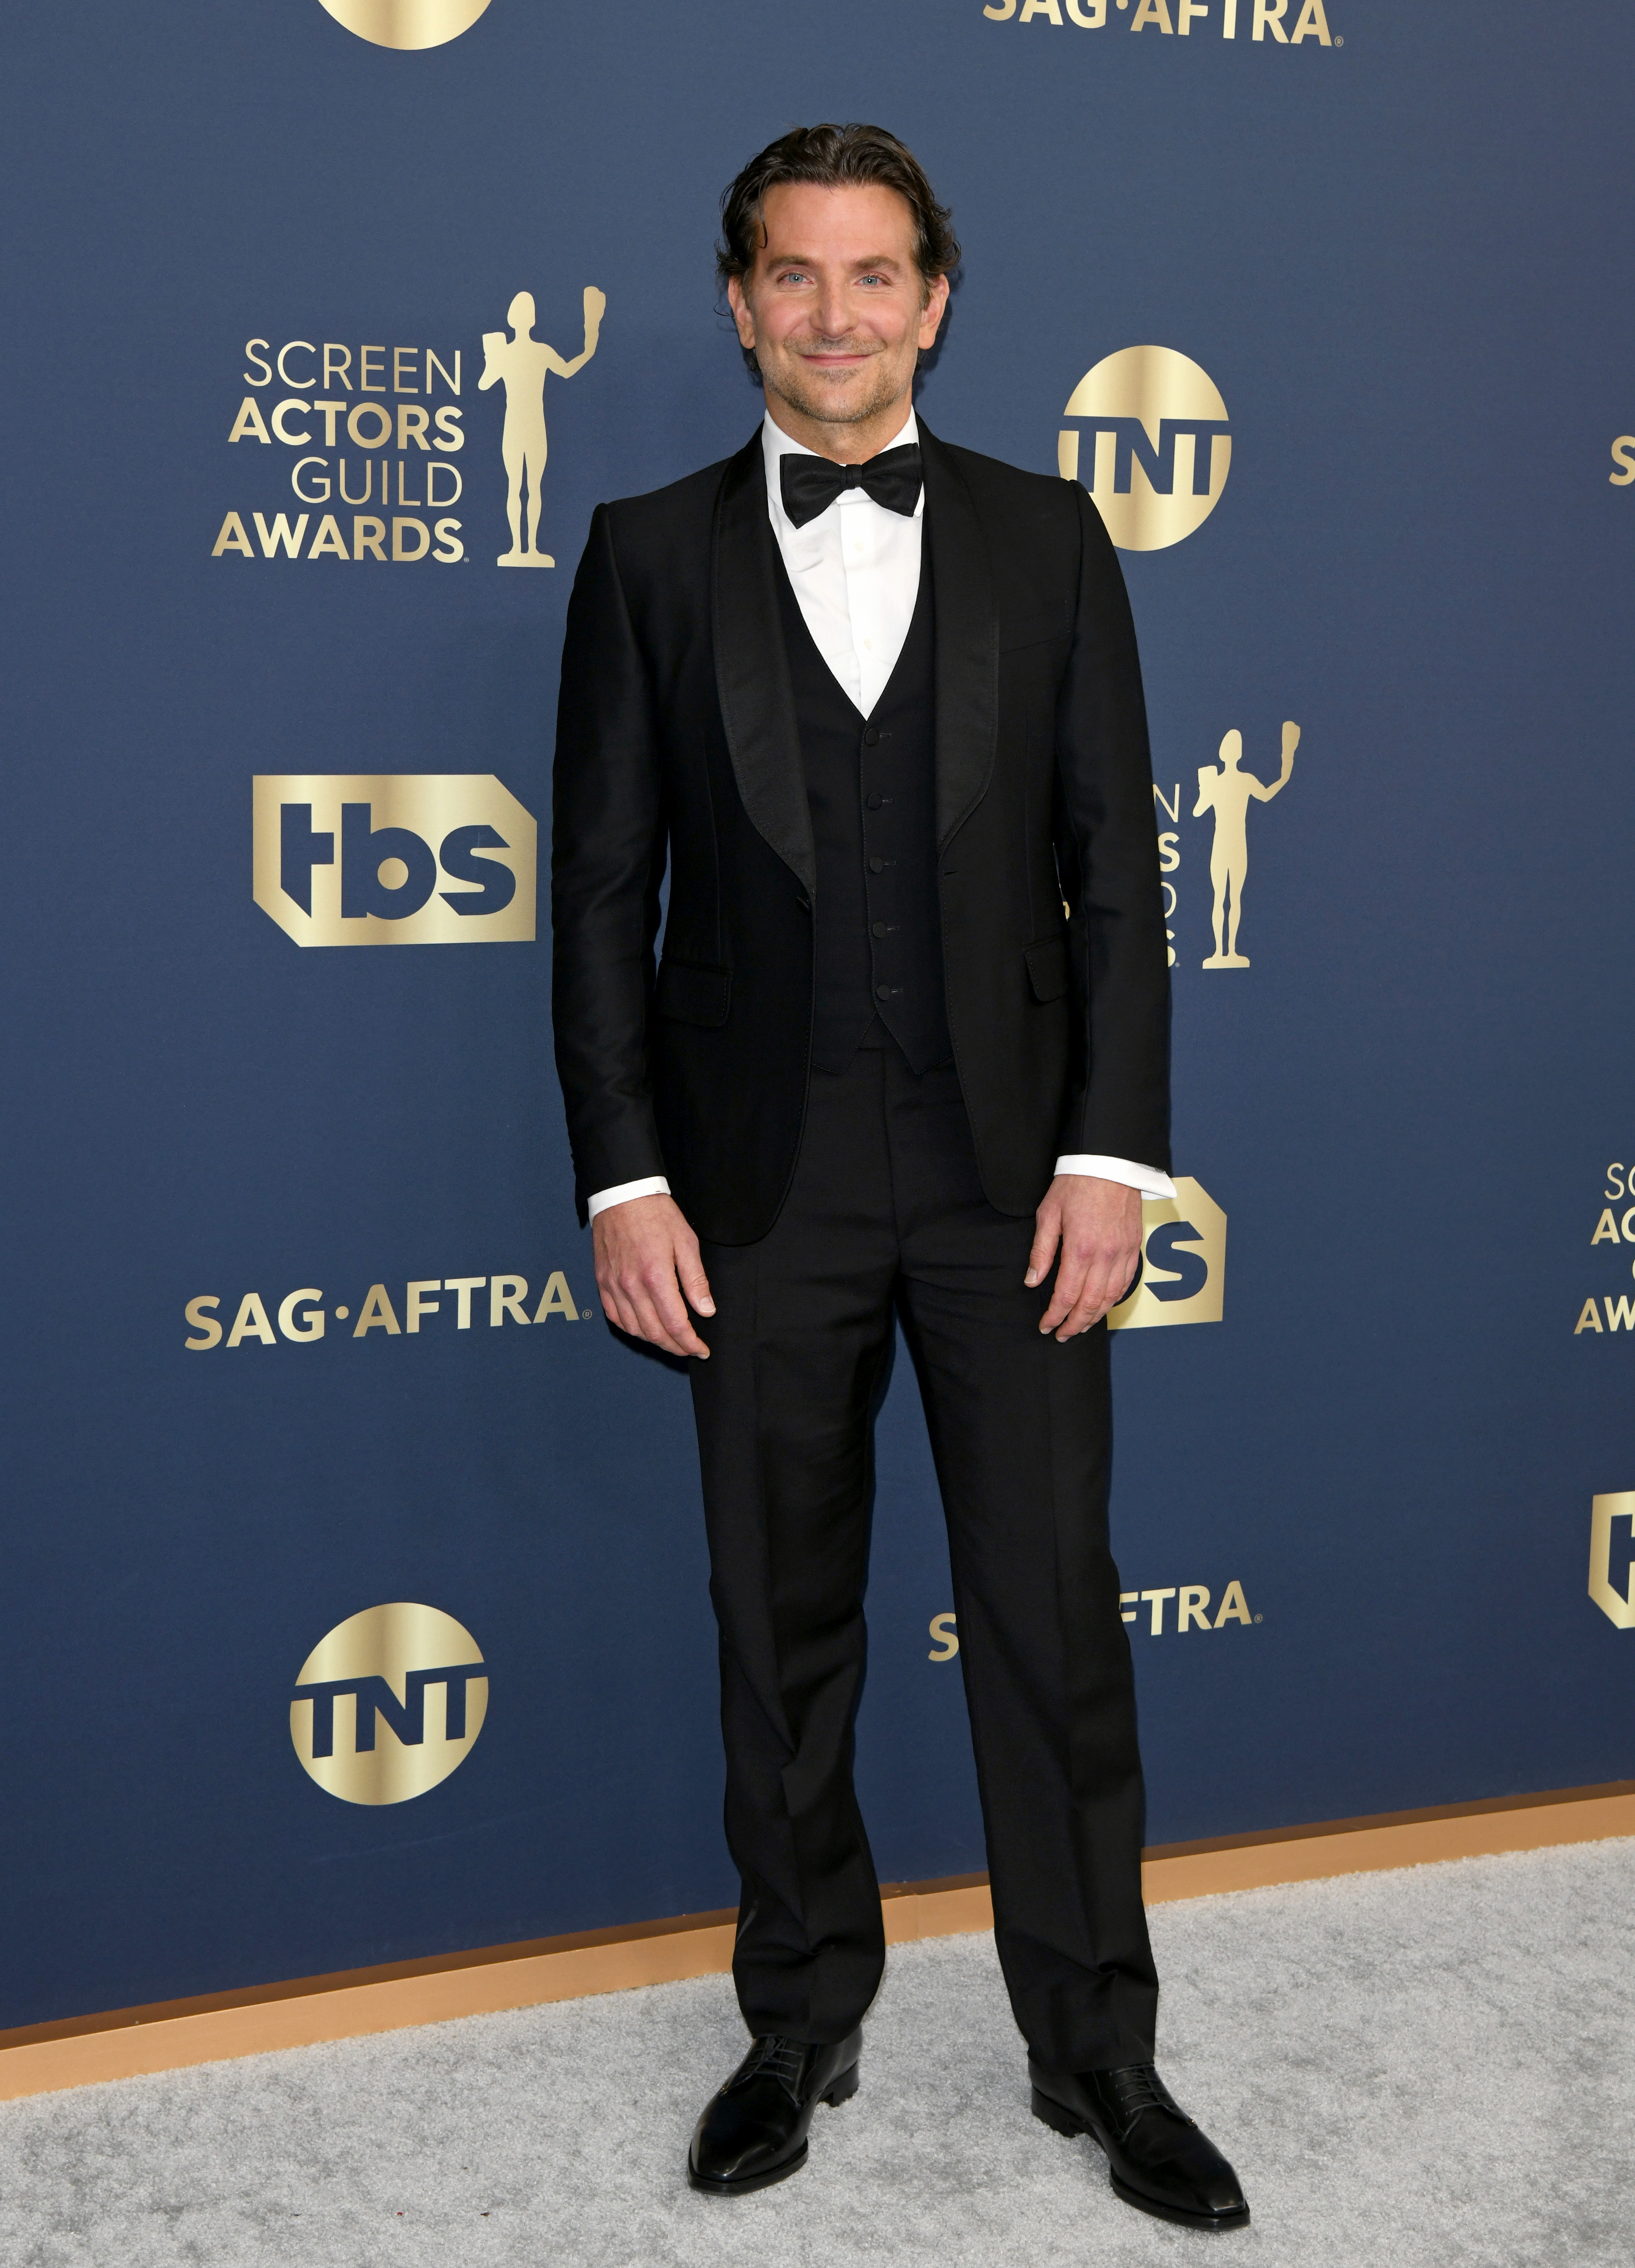 Bradley Cooper at the 28th Annual Screen Actors Guild Awards in Santa Monica, California on February 27, 2022 | Source: Getty Images